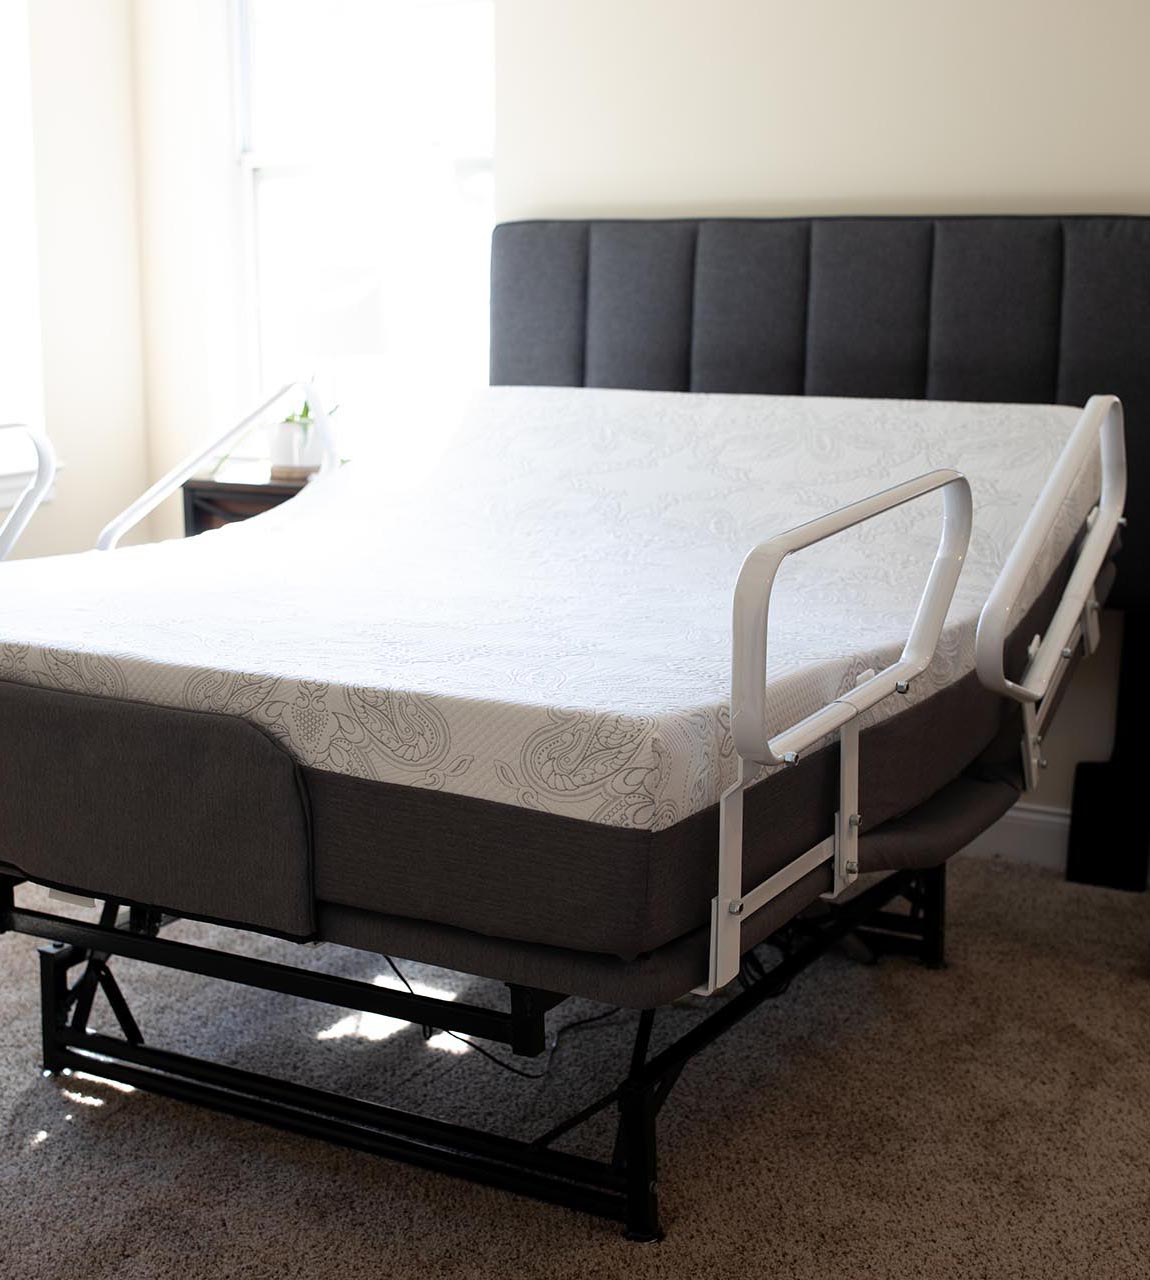 Long Beach heavy duty extra wide large obese electric bariatric bed